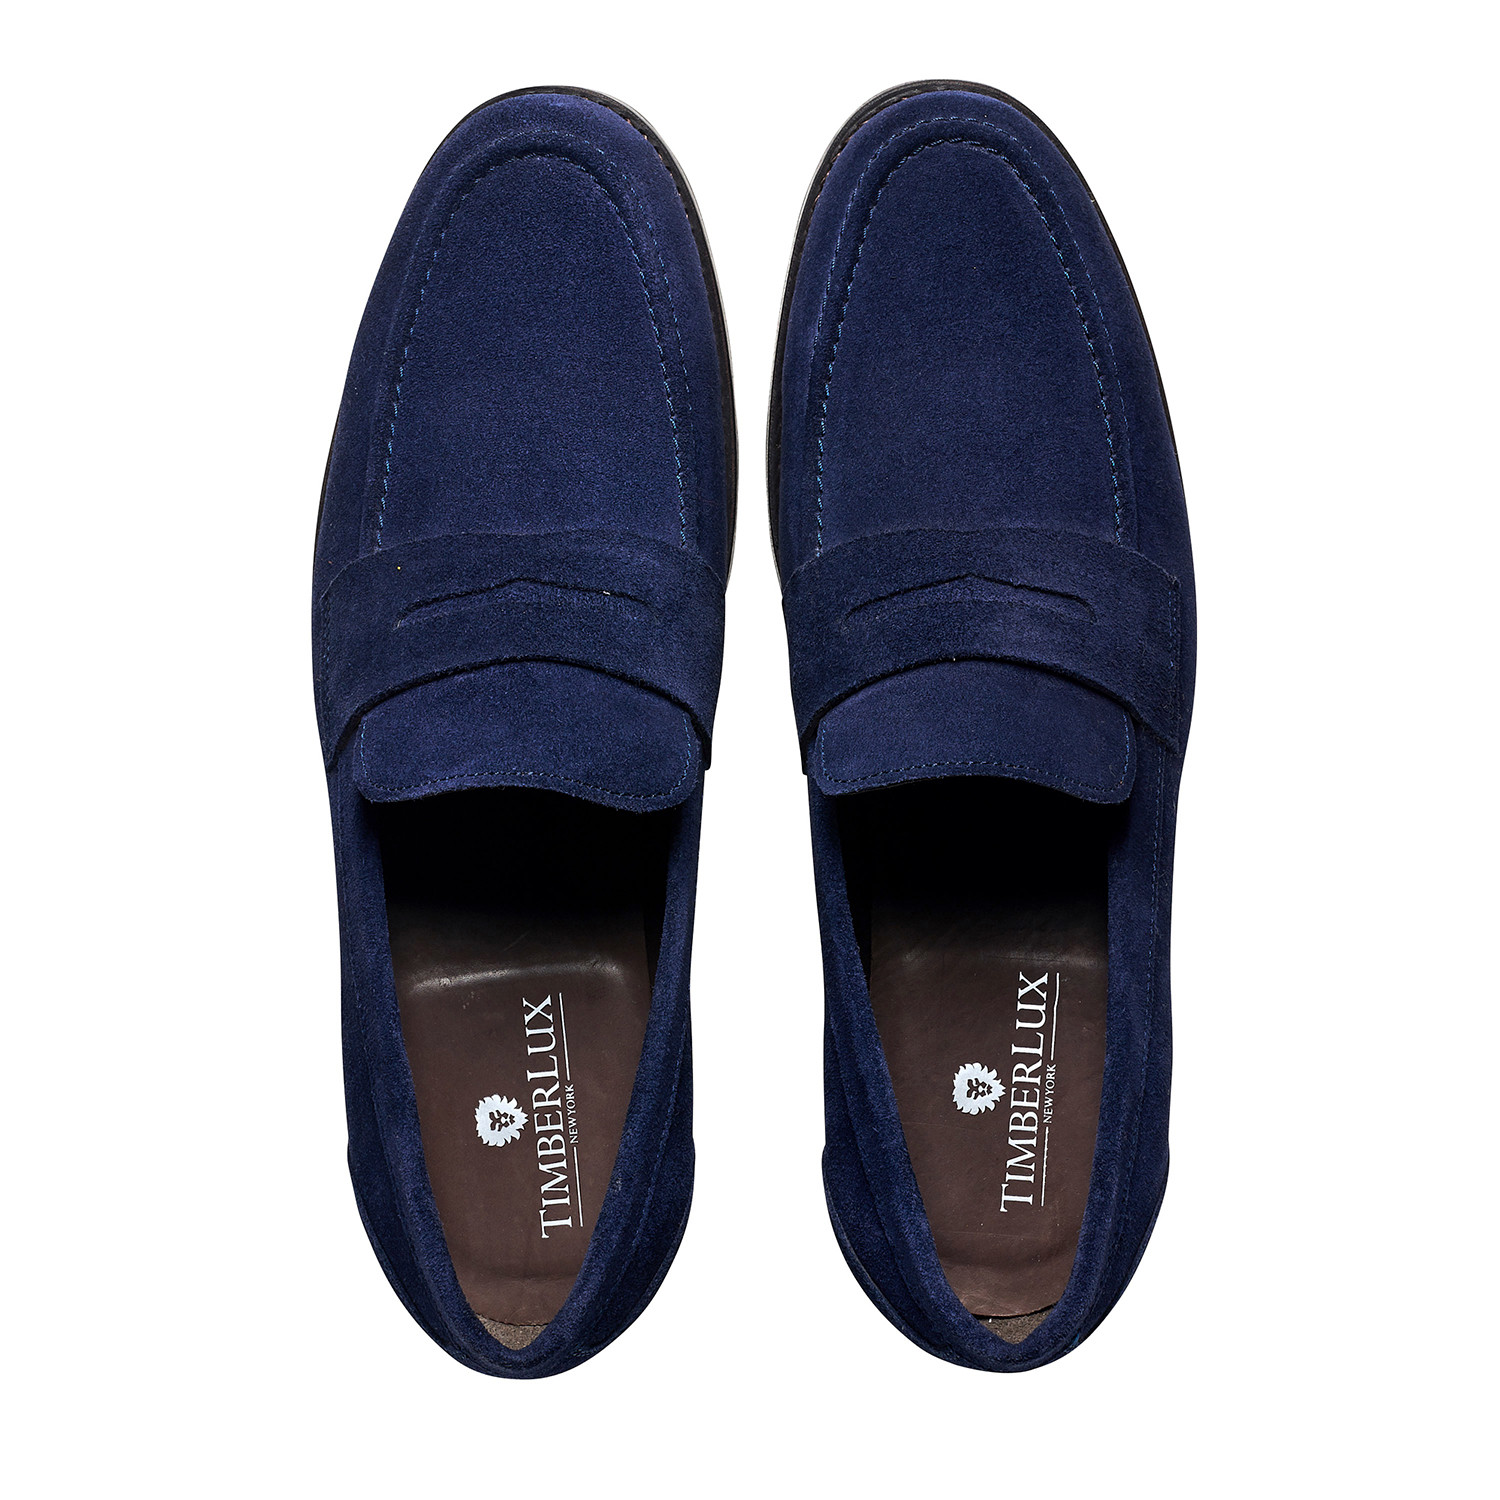 Blue Suede Penny Loafer // Goodyear Welted Construction // Royal Blue ...